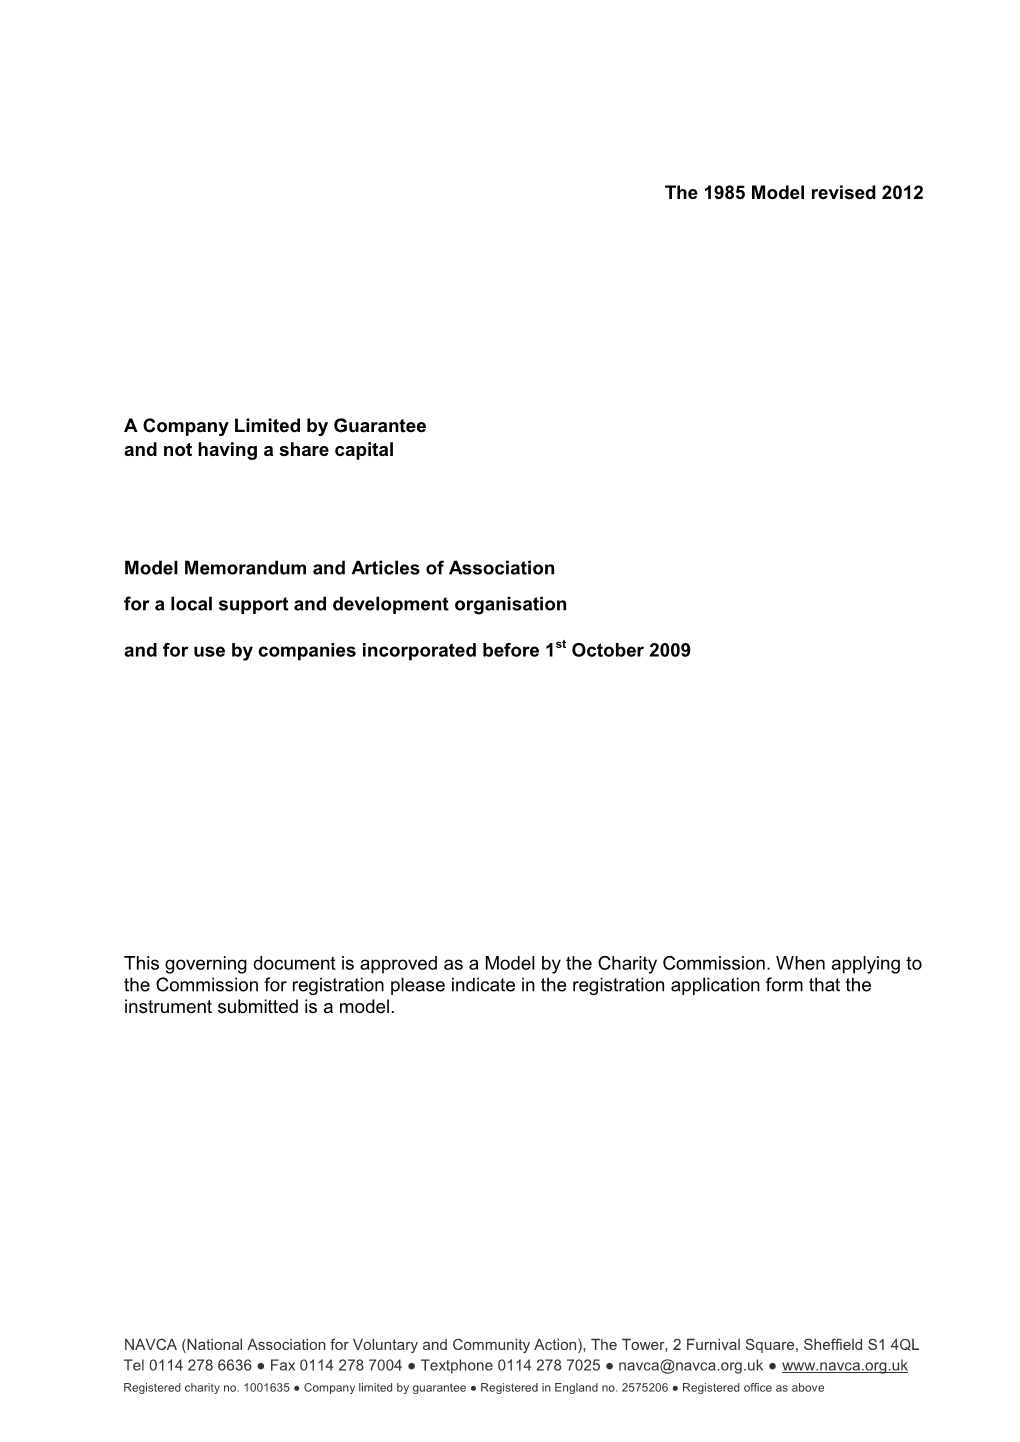 Memorandum of Association of Crawley Community and Voluntary Service Incorporated on the 17Th July 2002 and Amended by Special Resolution on the 9Th of March 2015